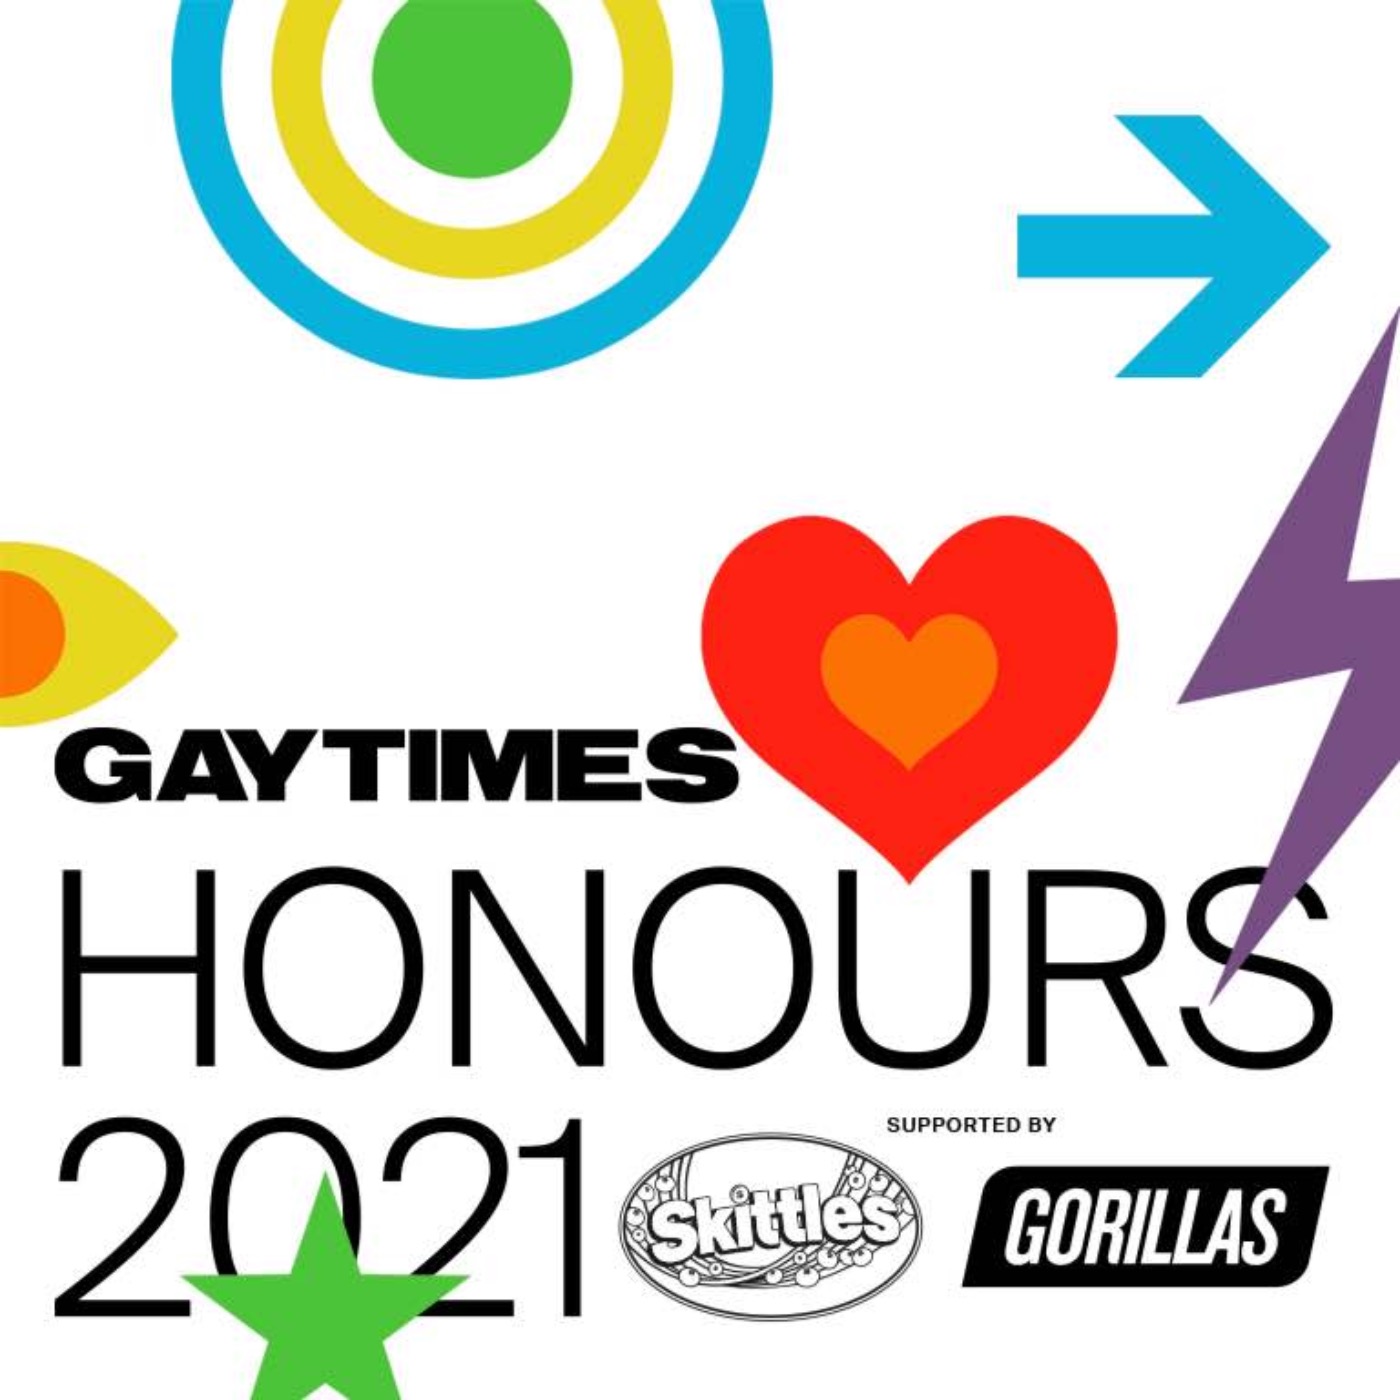 YOU are invited to GAY TIMES Honours!